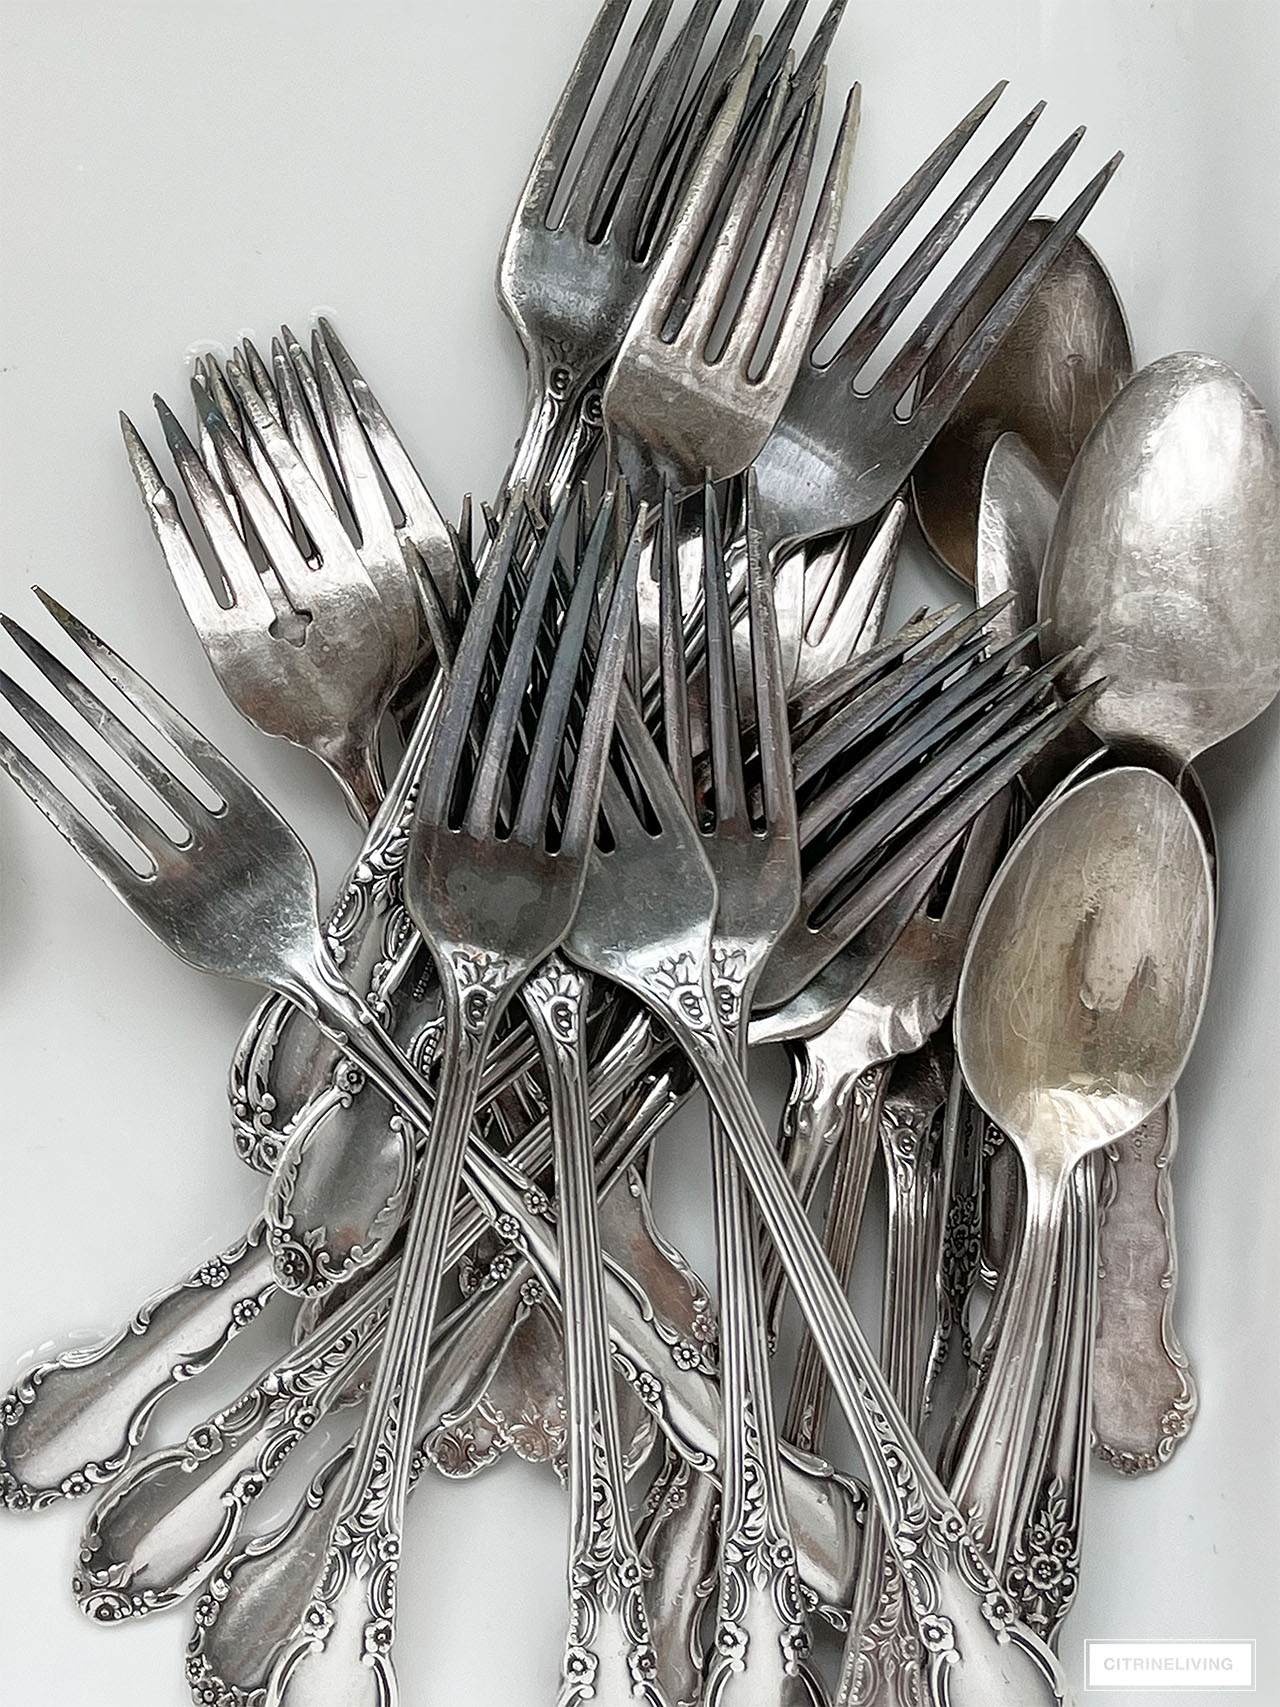 HOW TO CLEAN SILVERWARE EASILY